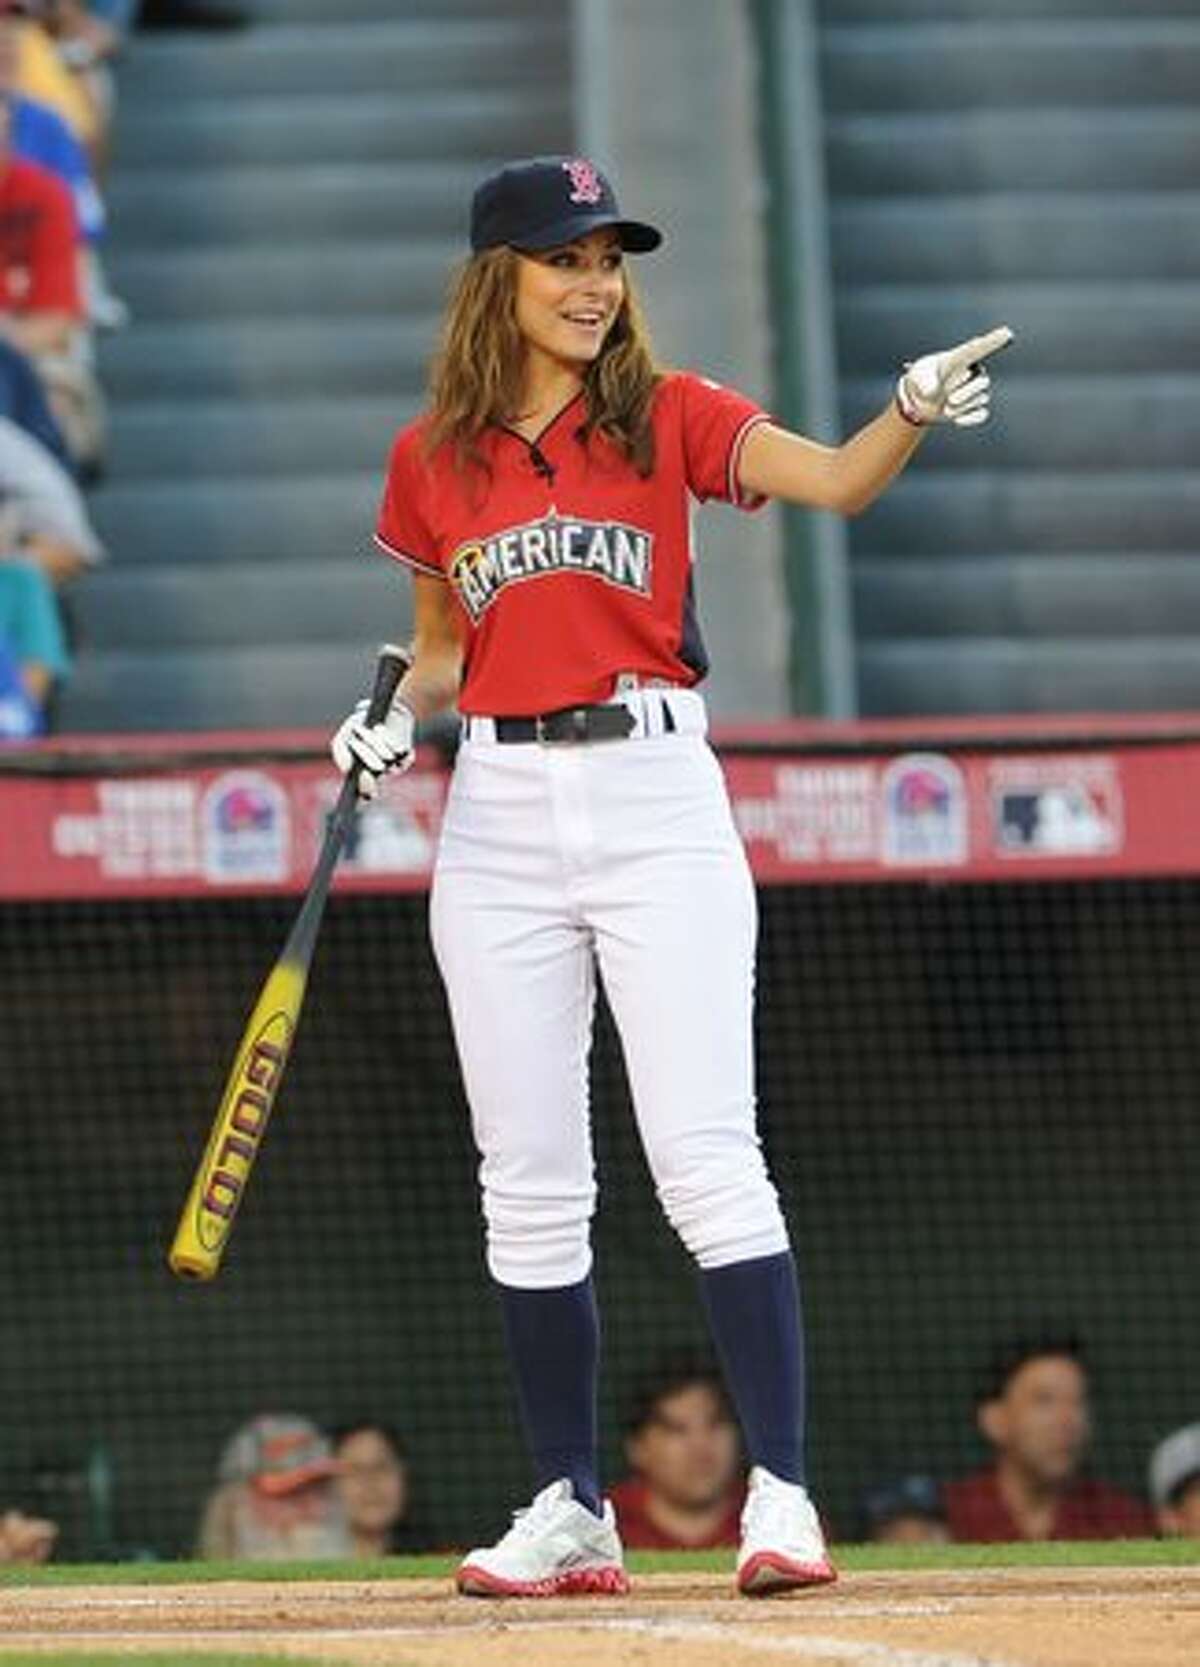 TV personality Maria Menounos at bat during the MLB All Star Game Celebrity Softball Game at Angels Stadium in Anaheim, California.